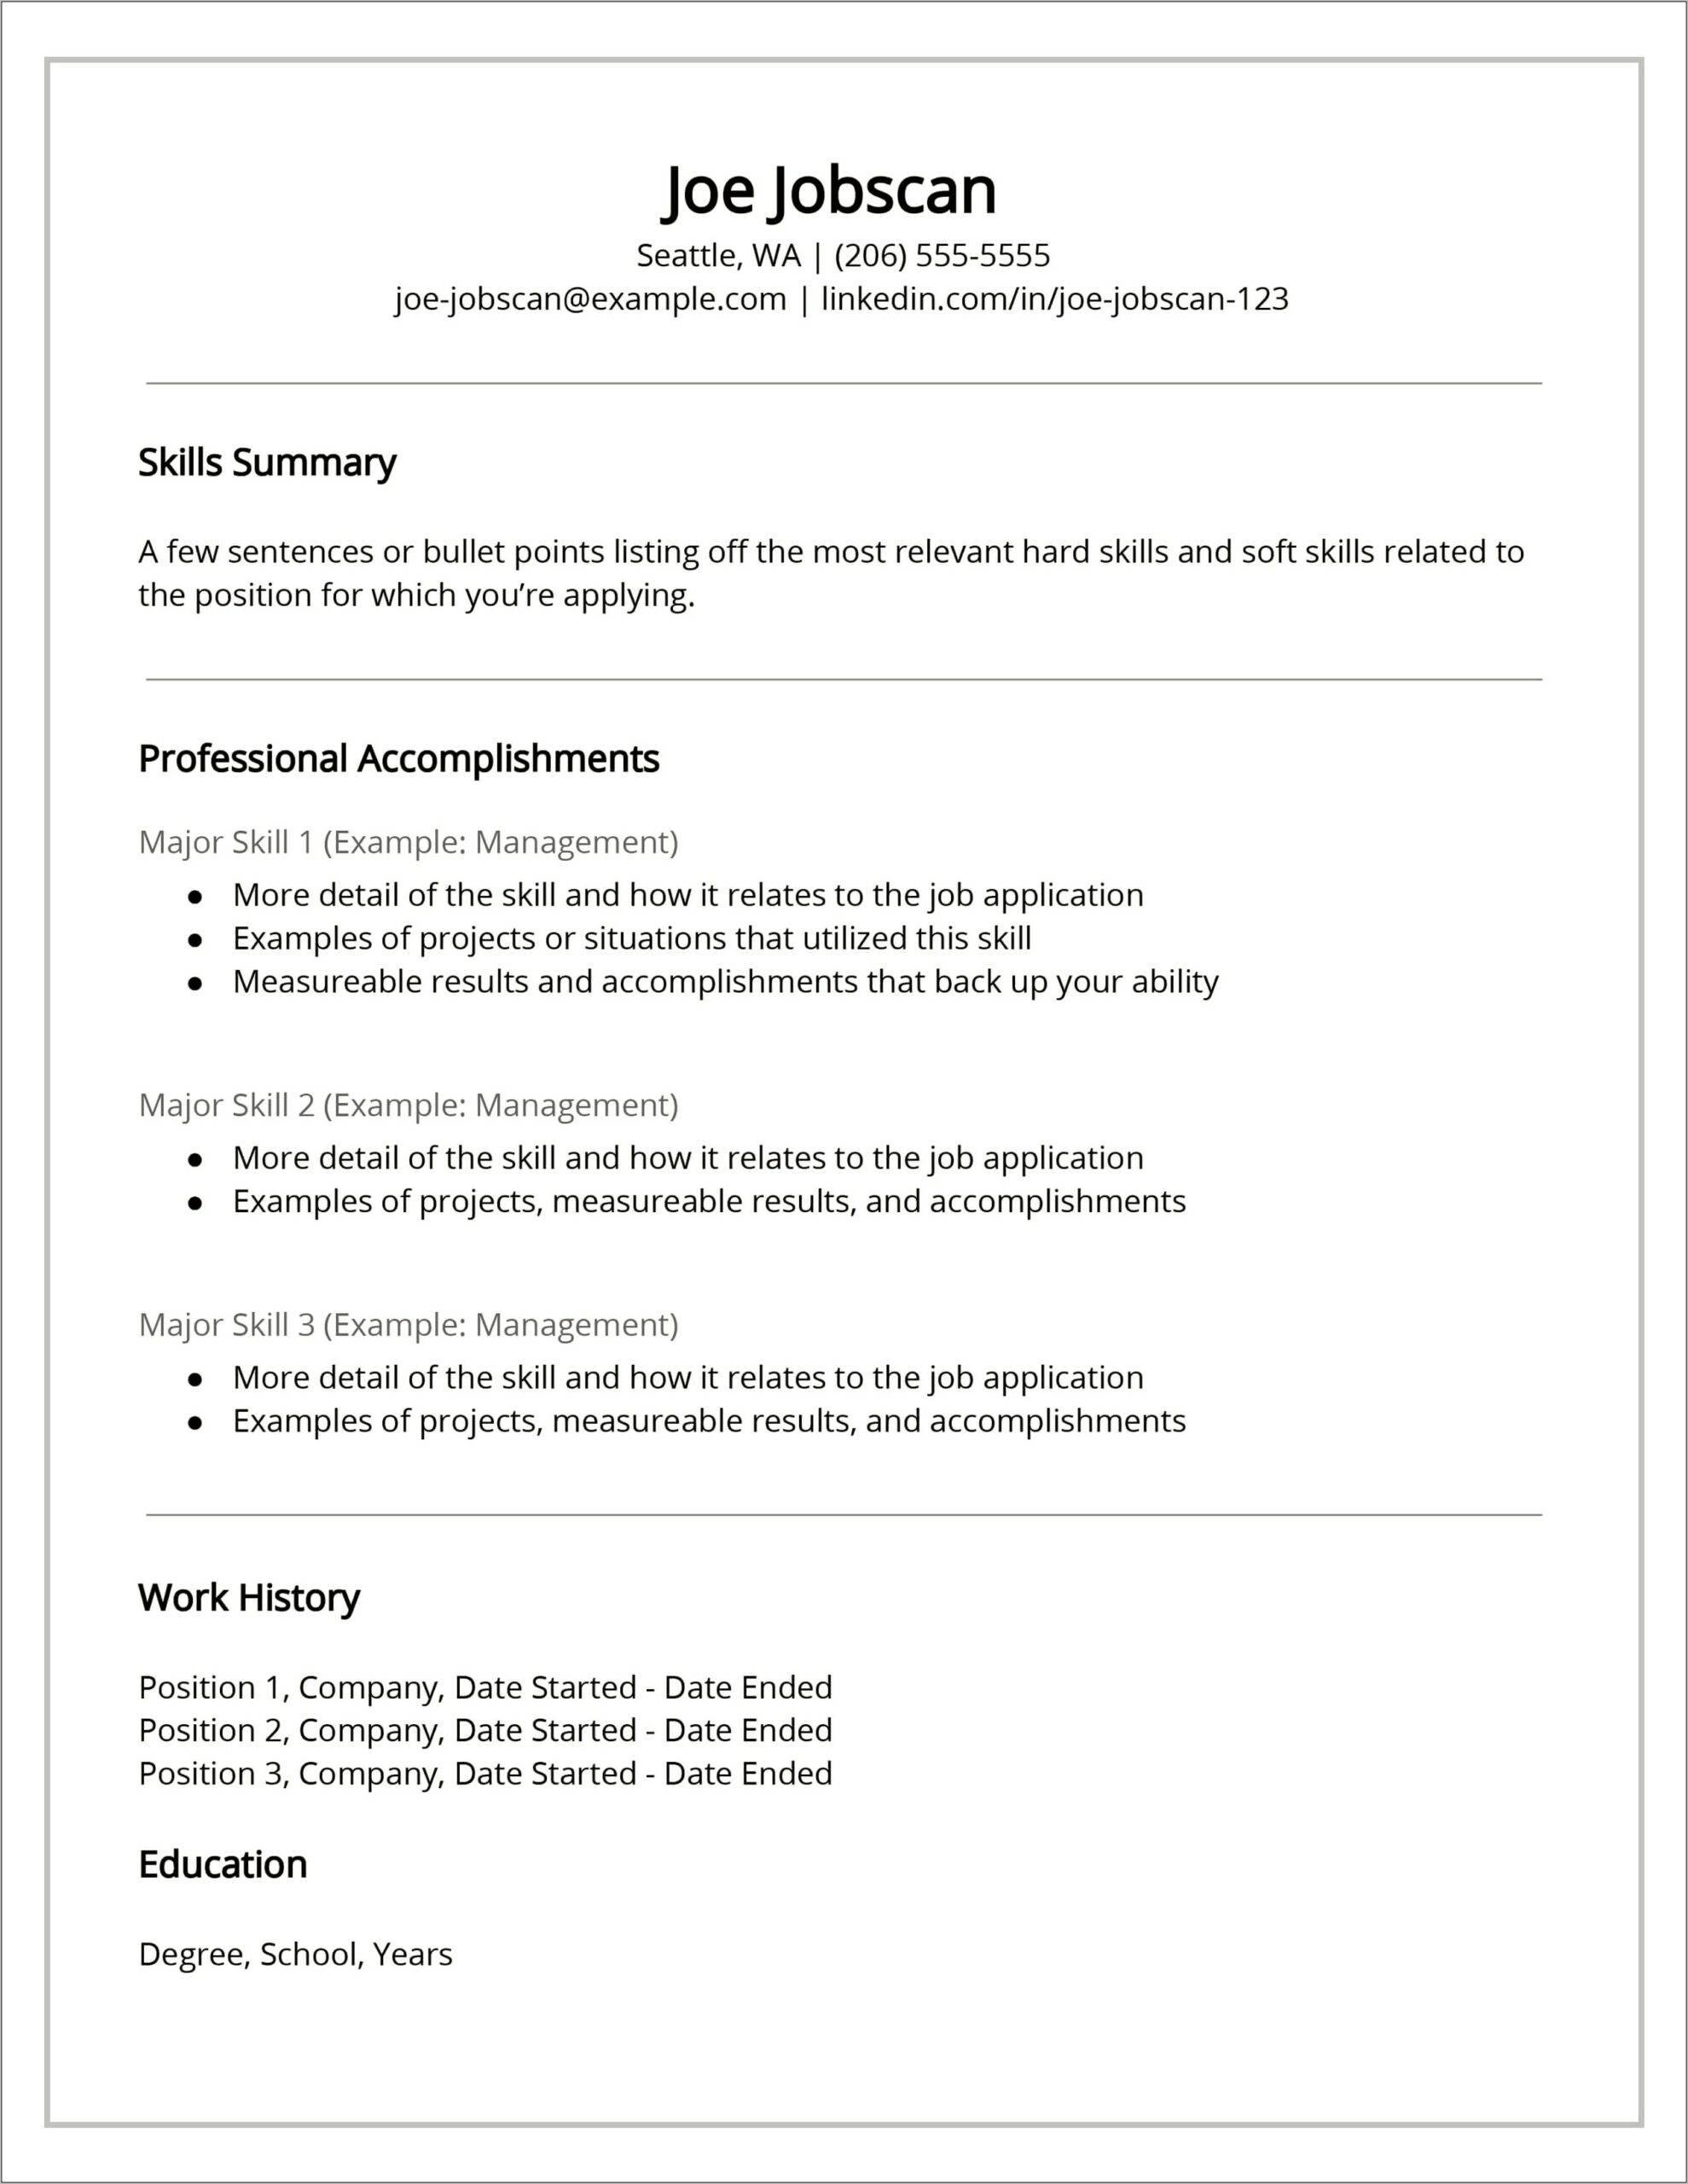 Resume Duties And Accomplishments Examples